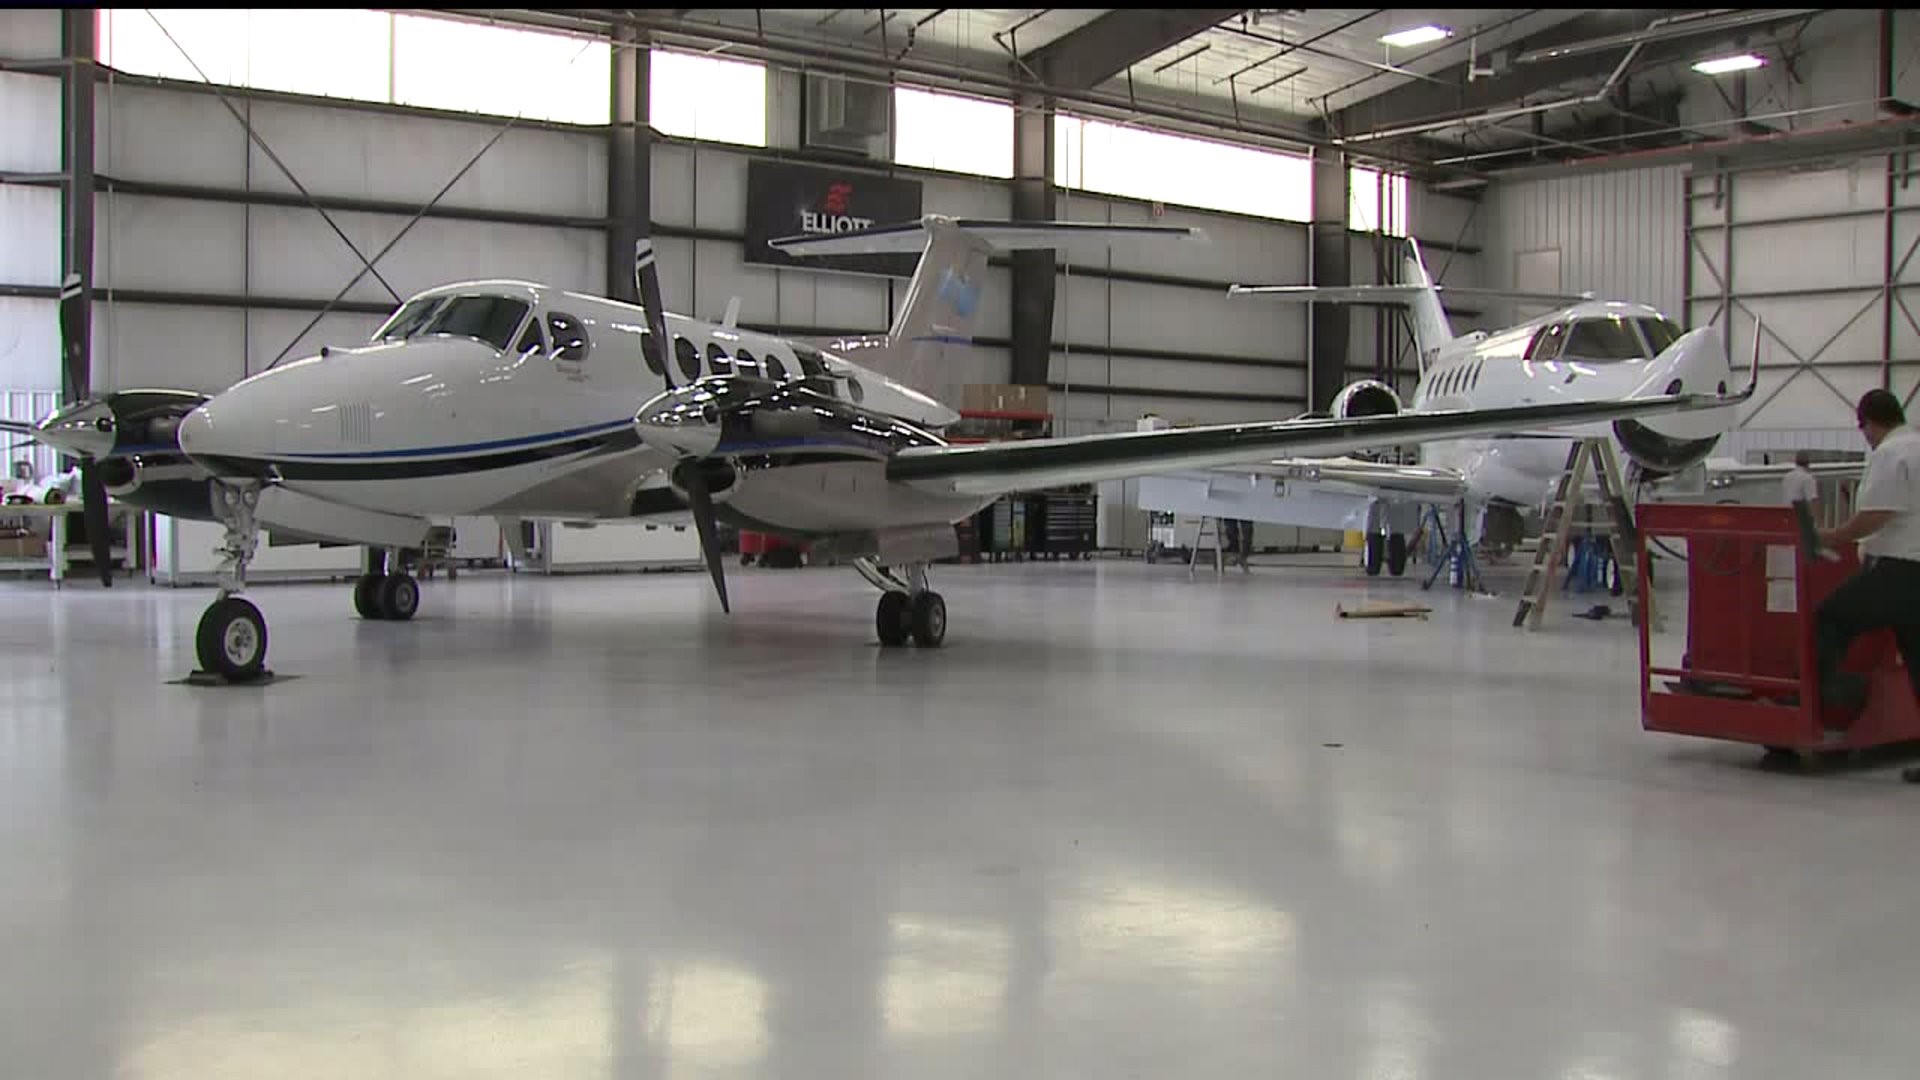 Local aviation facility says they could cut jobs if bill allowing tax breaks is not passed